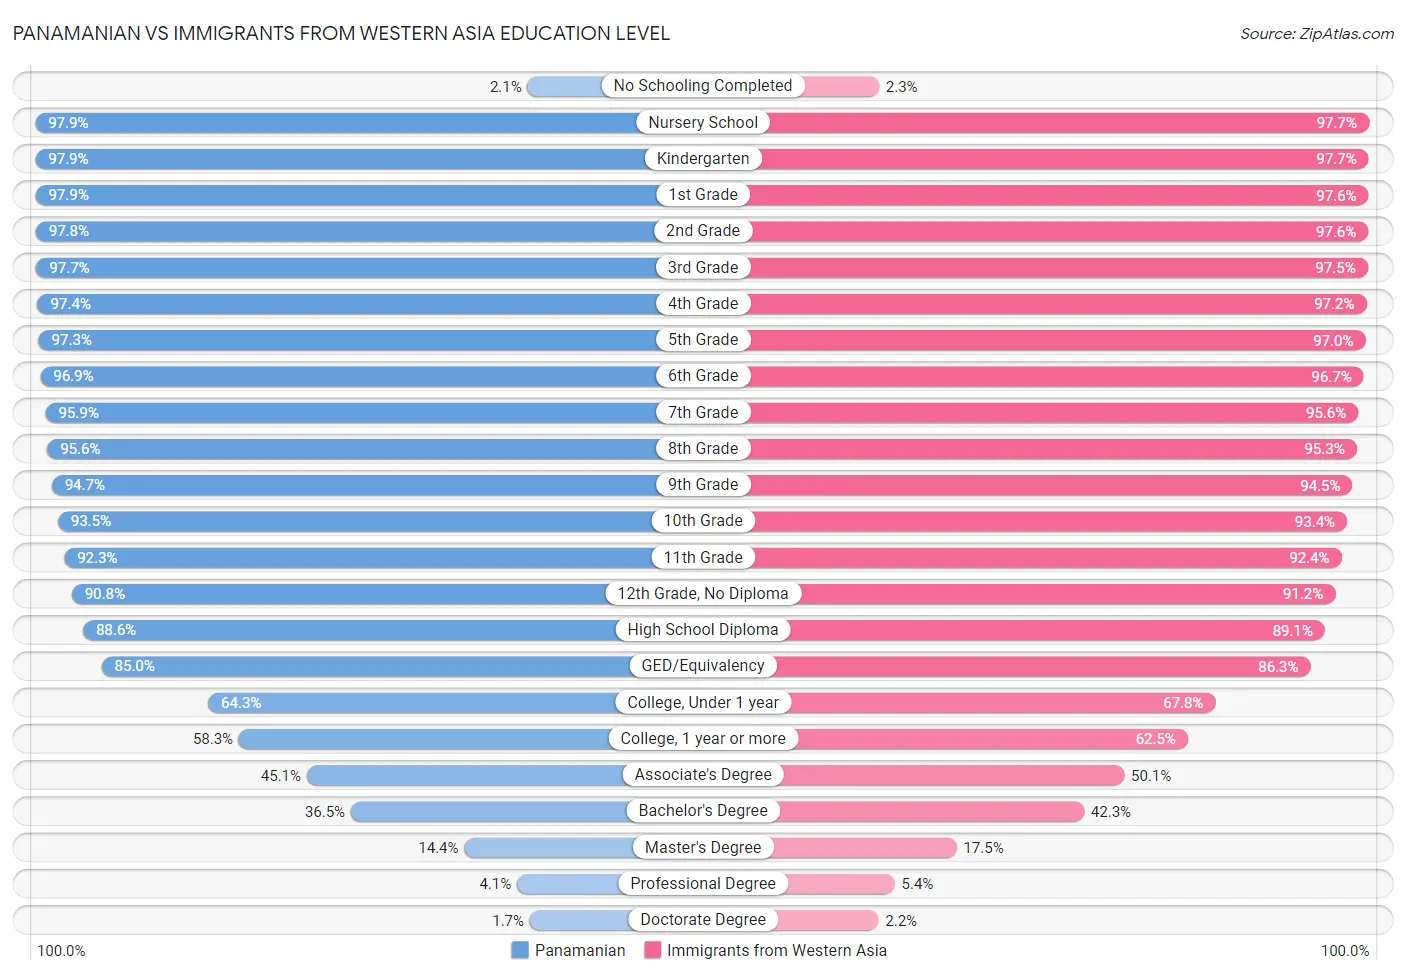 Panamanian vs Immigrants from Western Asia Education Level